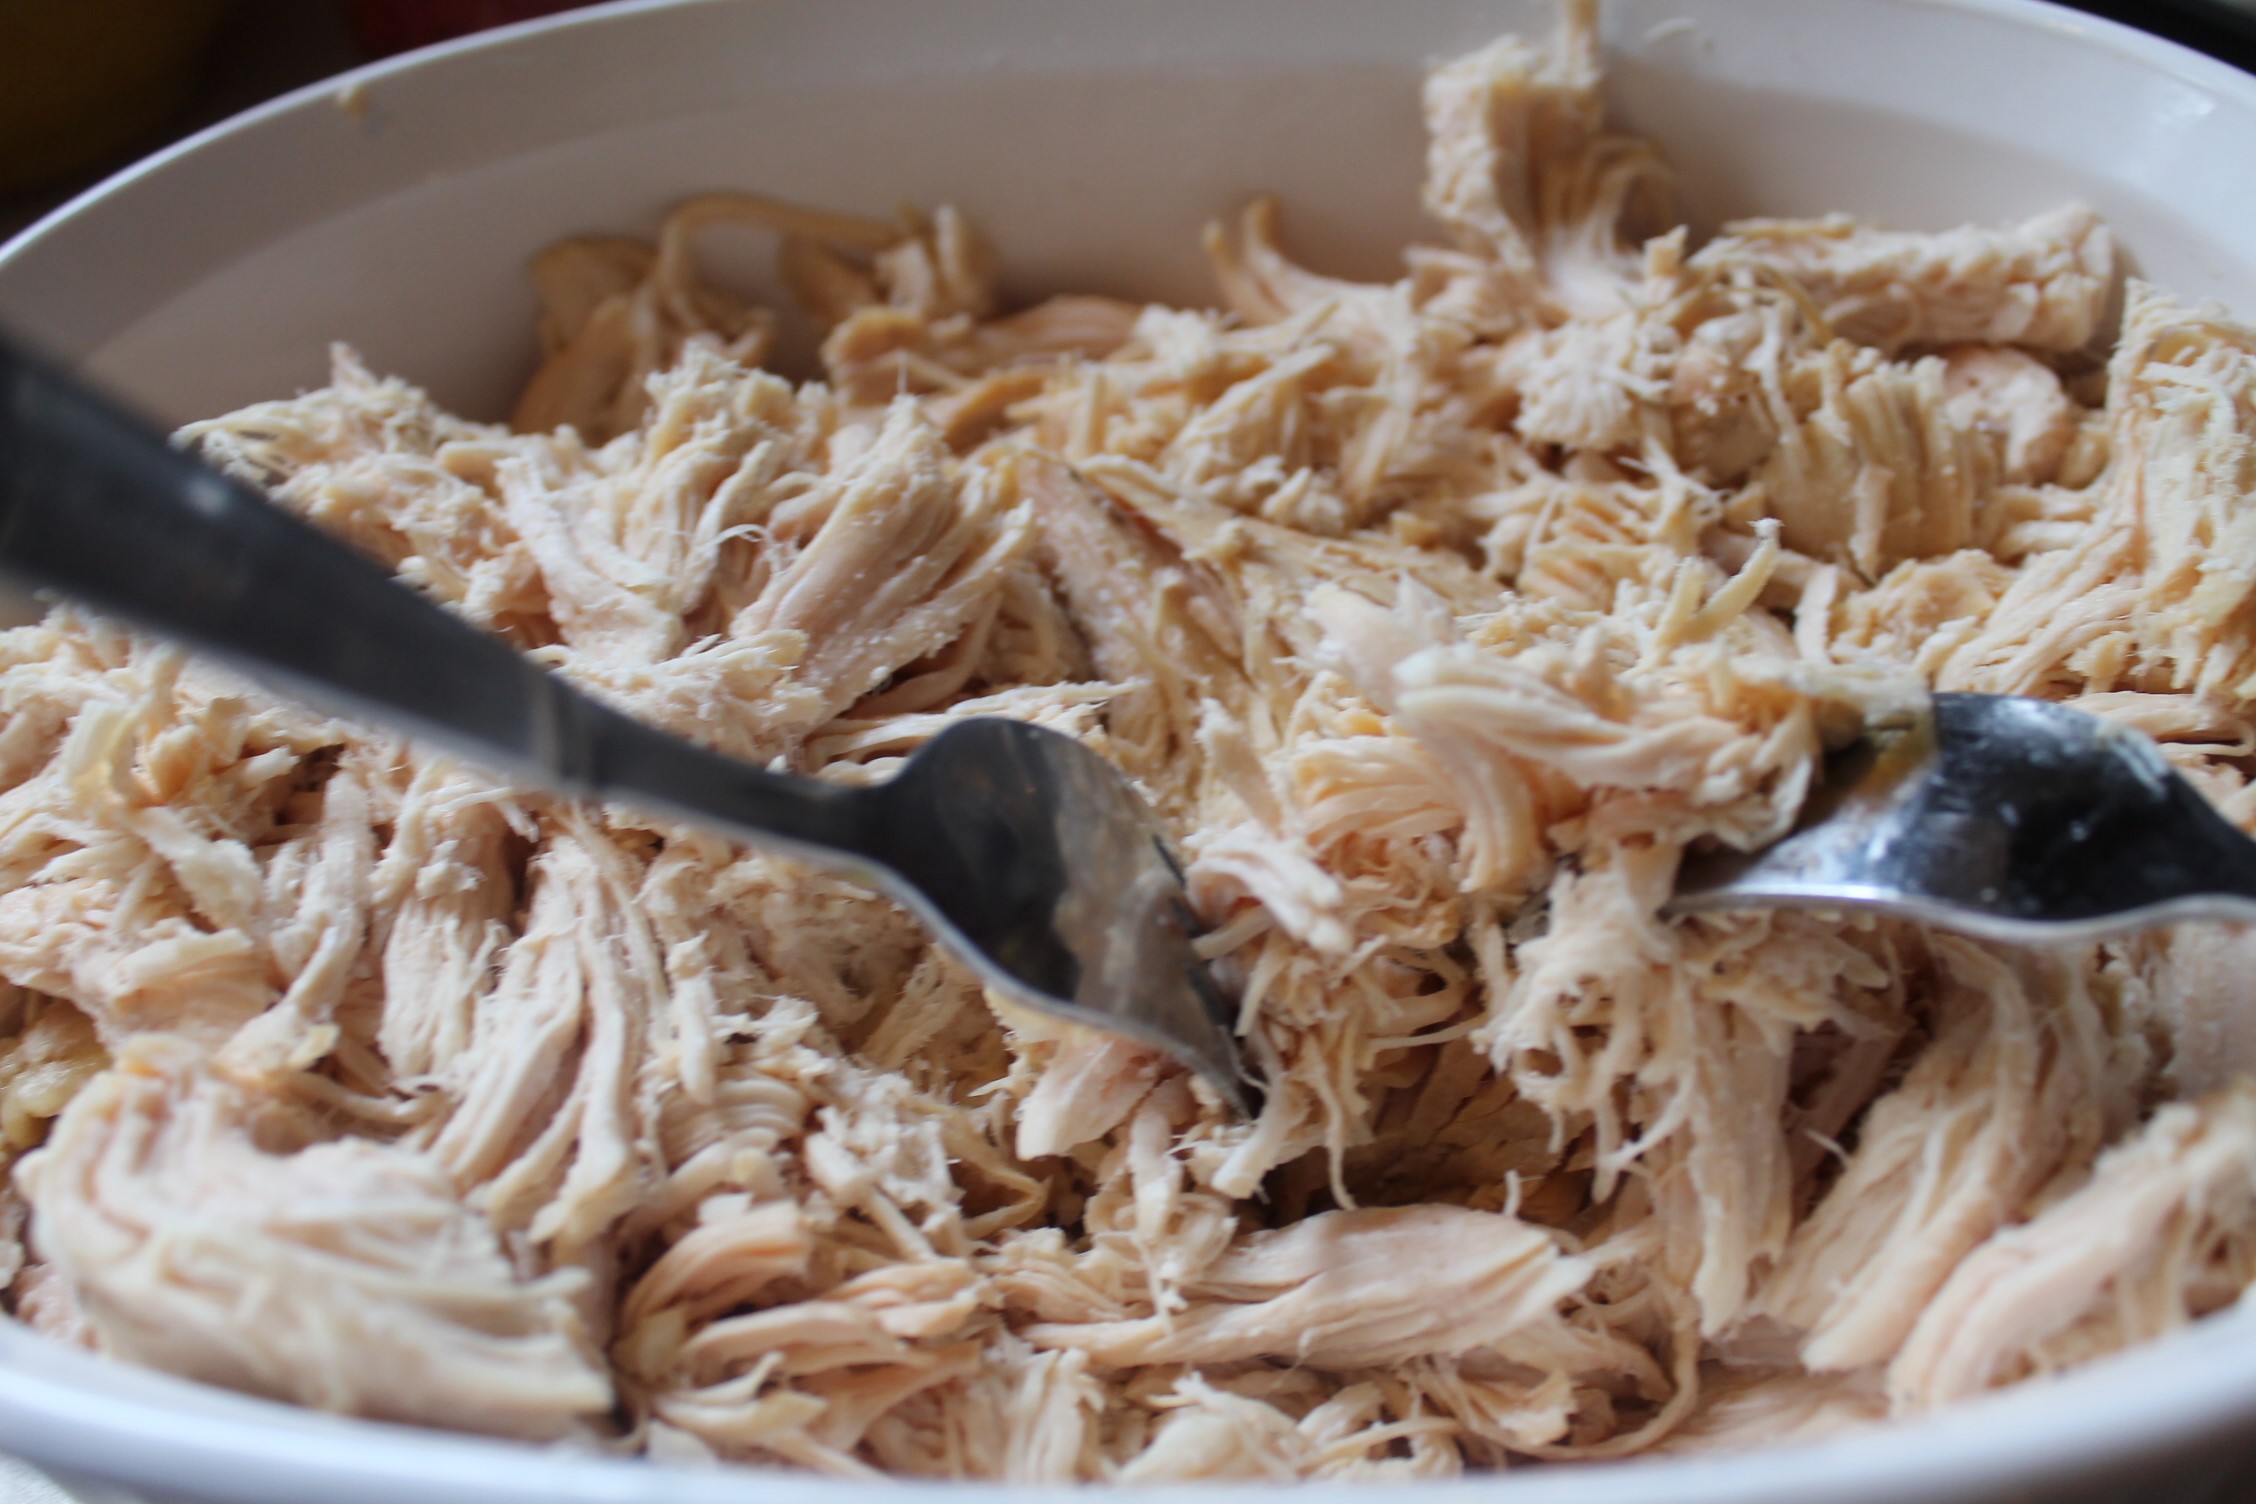 Shredded chicken in white bowl with two forks